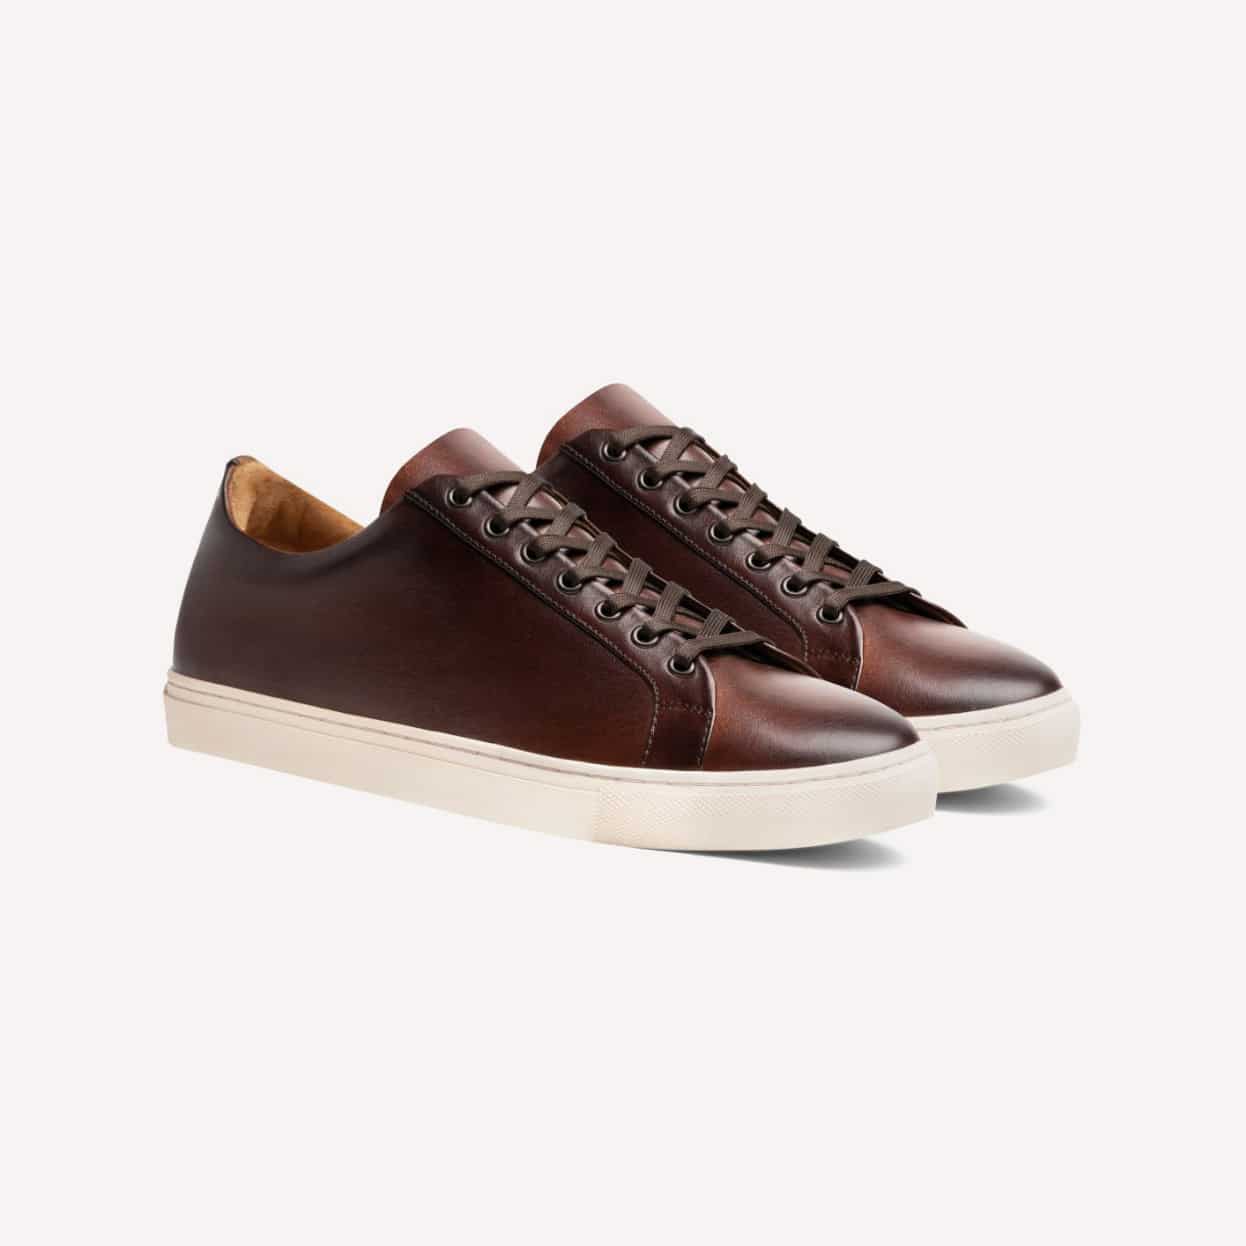 Buy Brown Scuro Marrone Leather Sneakers For Men by Dmodot Online